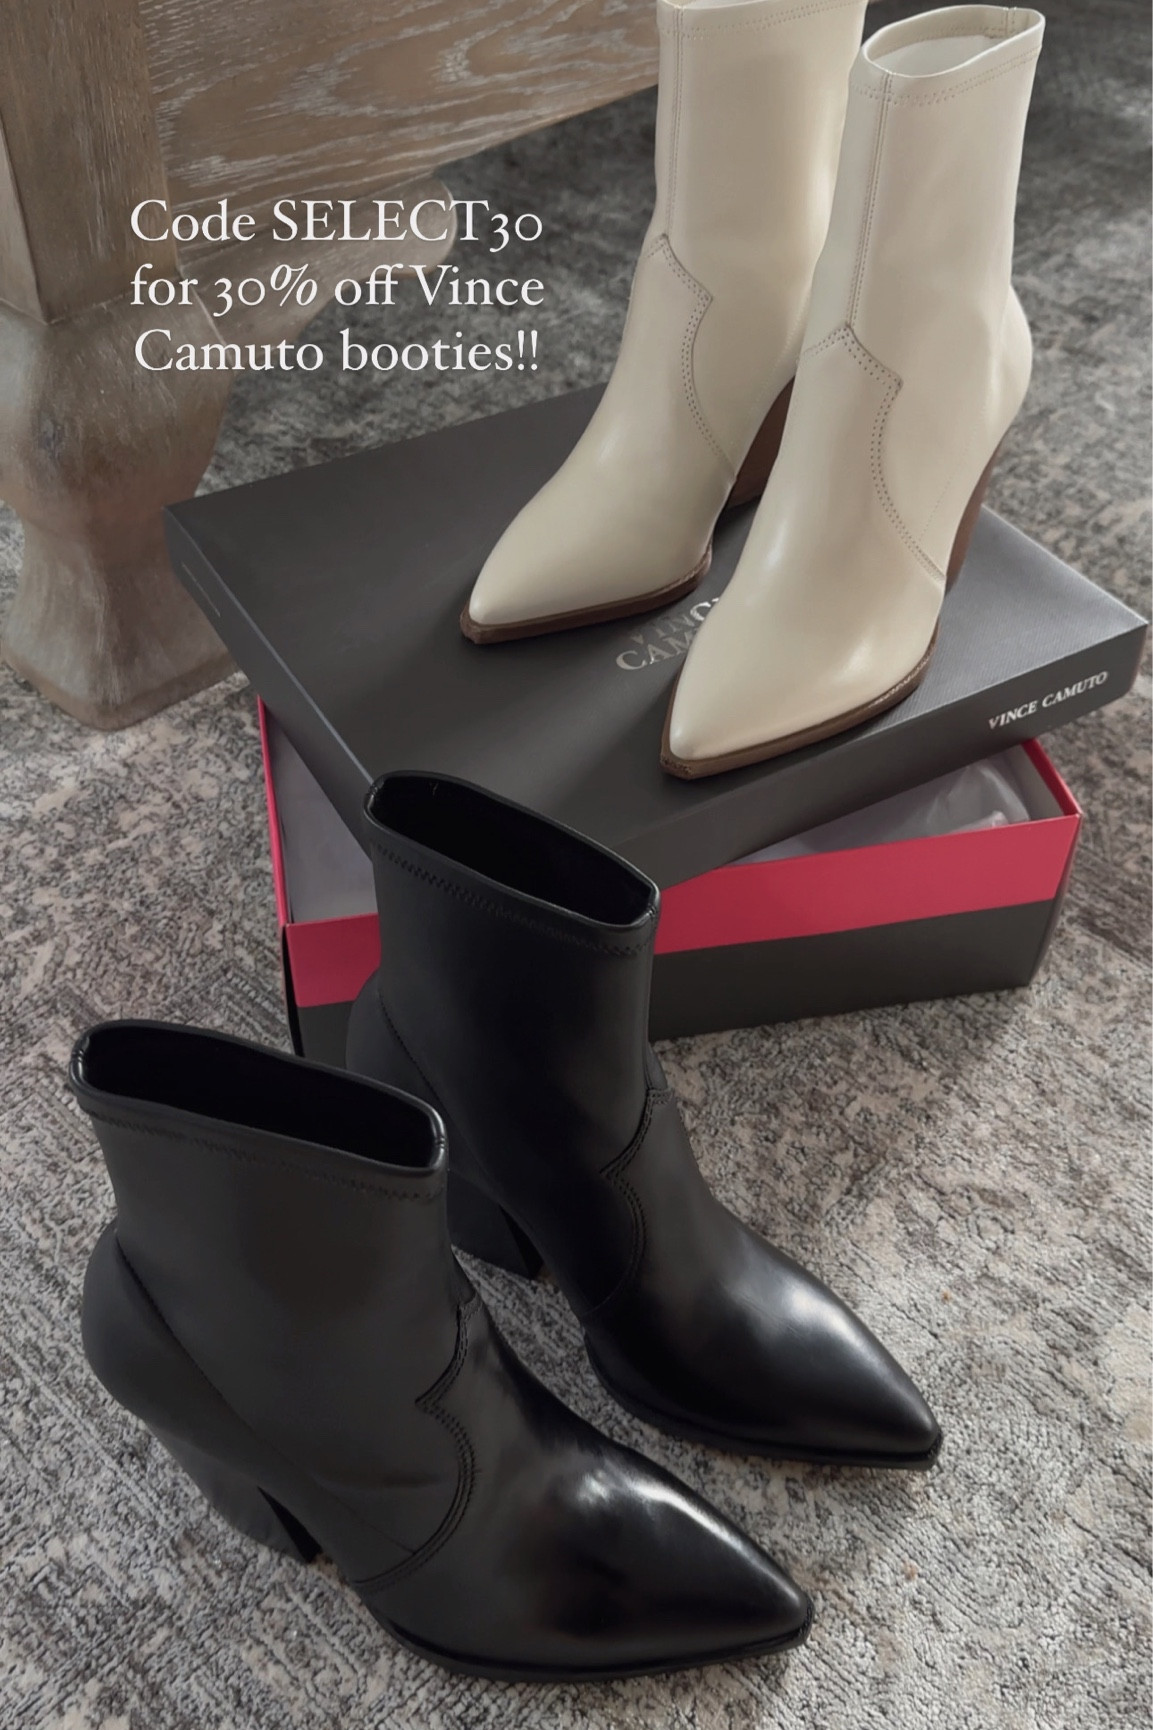 Vince Camuto - Intimate Classics available at @Nordstrom